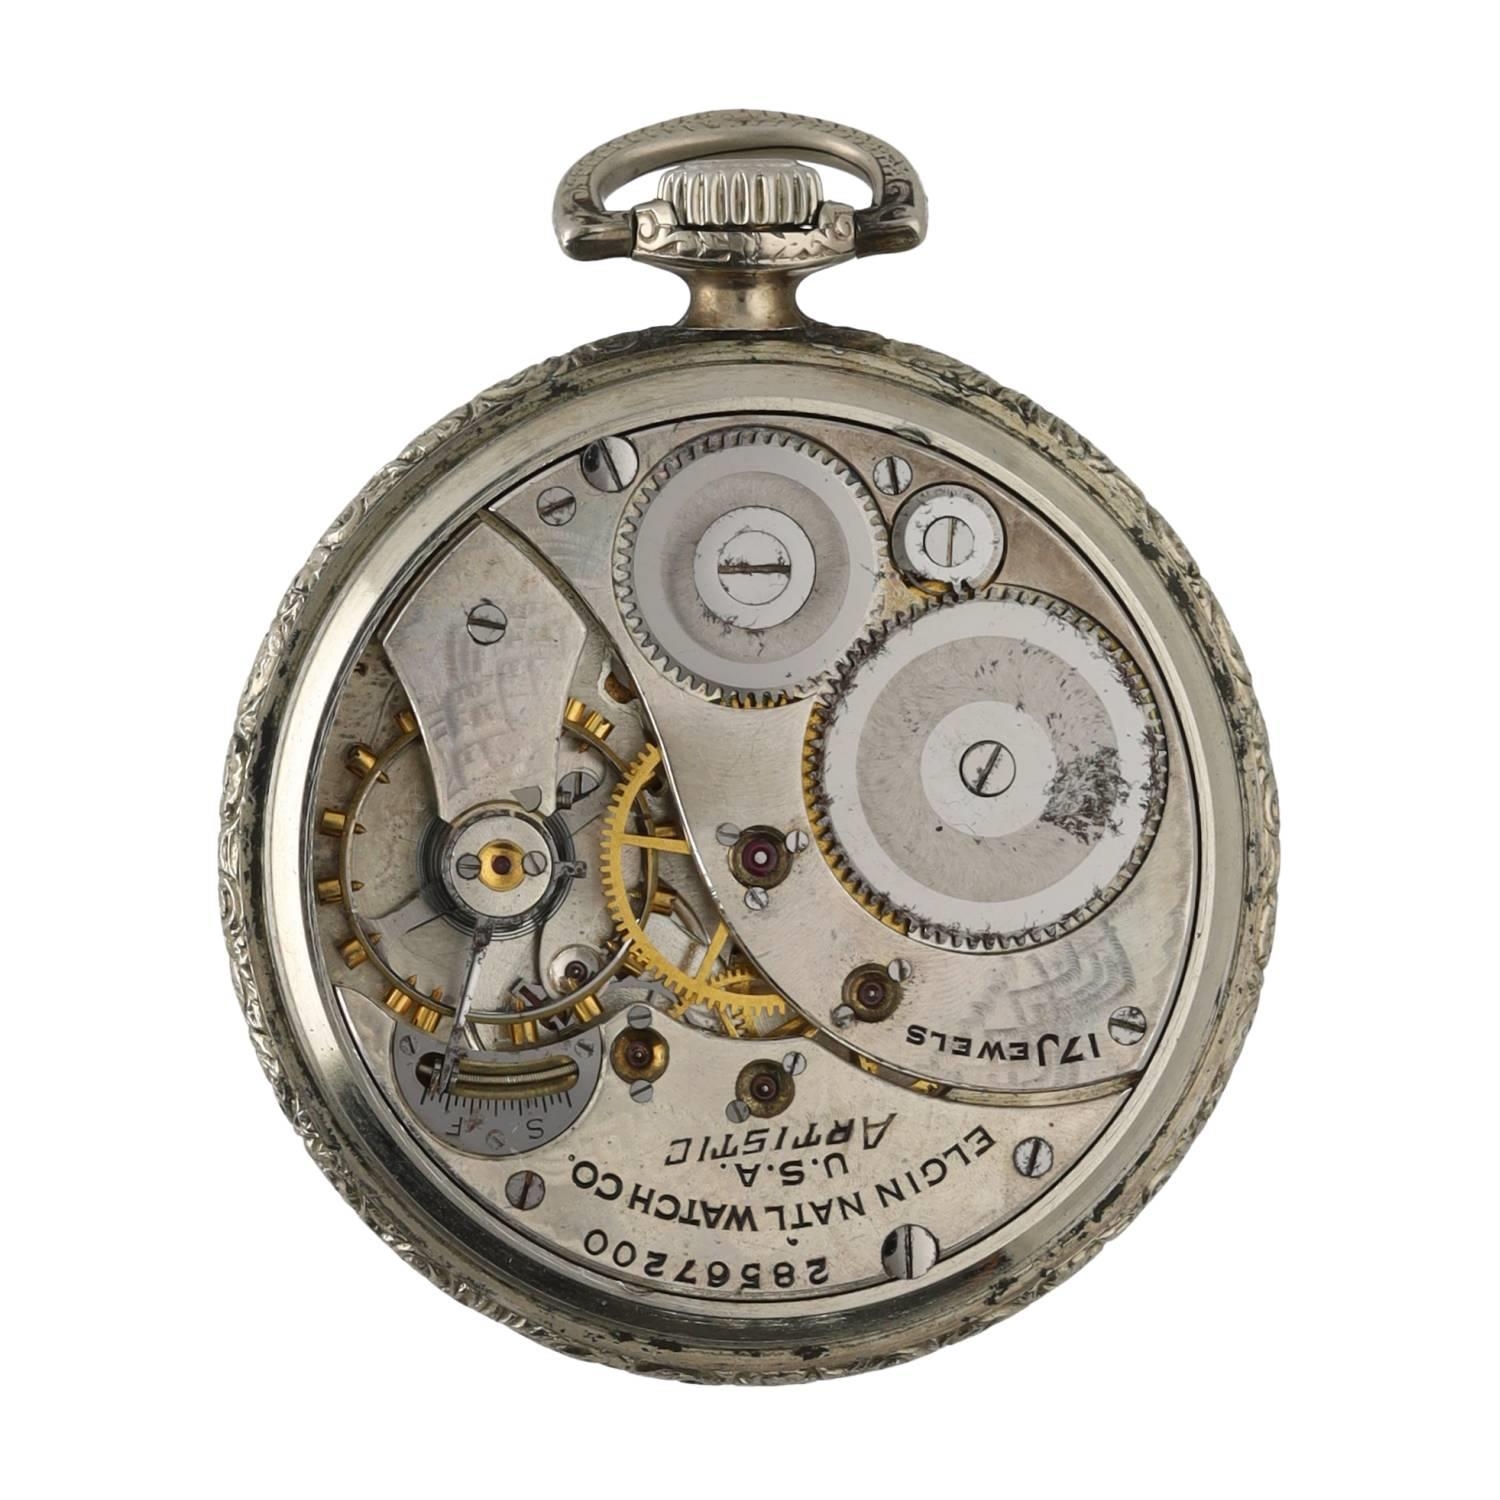 Elgin National Watch Co. 'Artistic' lever pocket watch, circa 1925, serial no. 28567200, signed 17 - Image 3 of 4